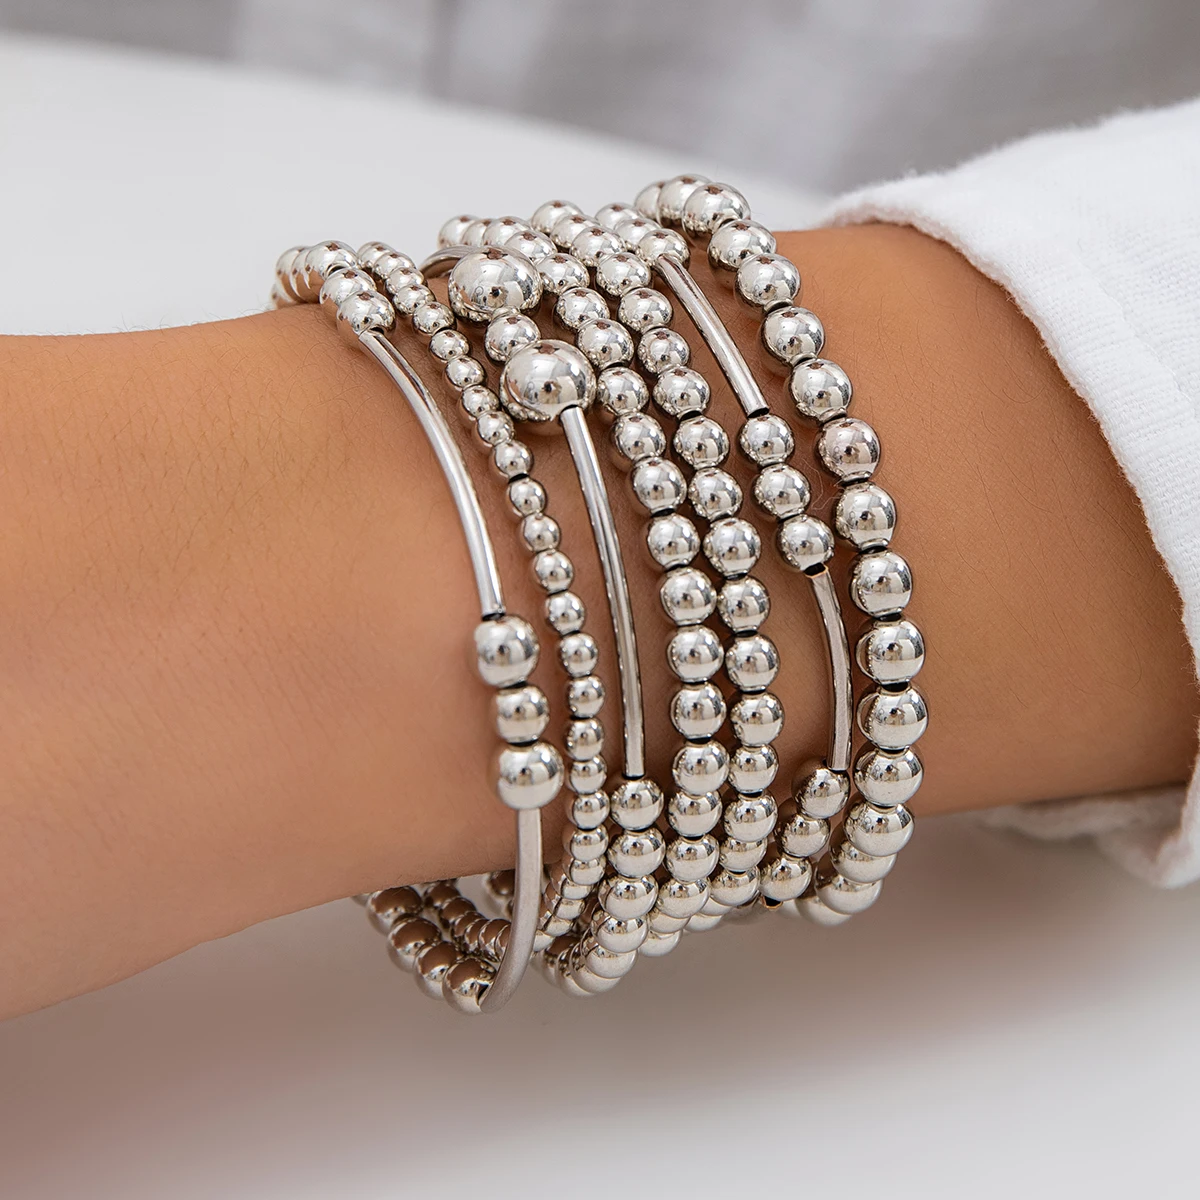 

7Pc Unique Silver Color Round CCB Ball Chain Bracelet for Women Vintage Elastic Strand Beads Bangles Couple Friends Hand Jewelry